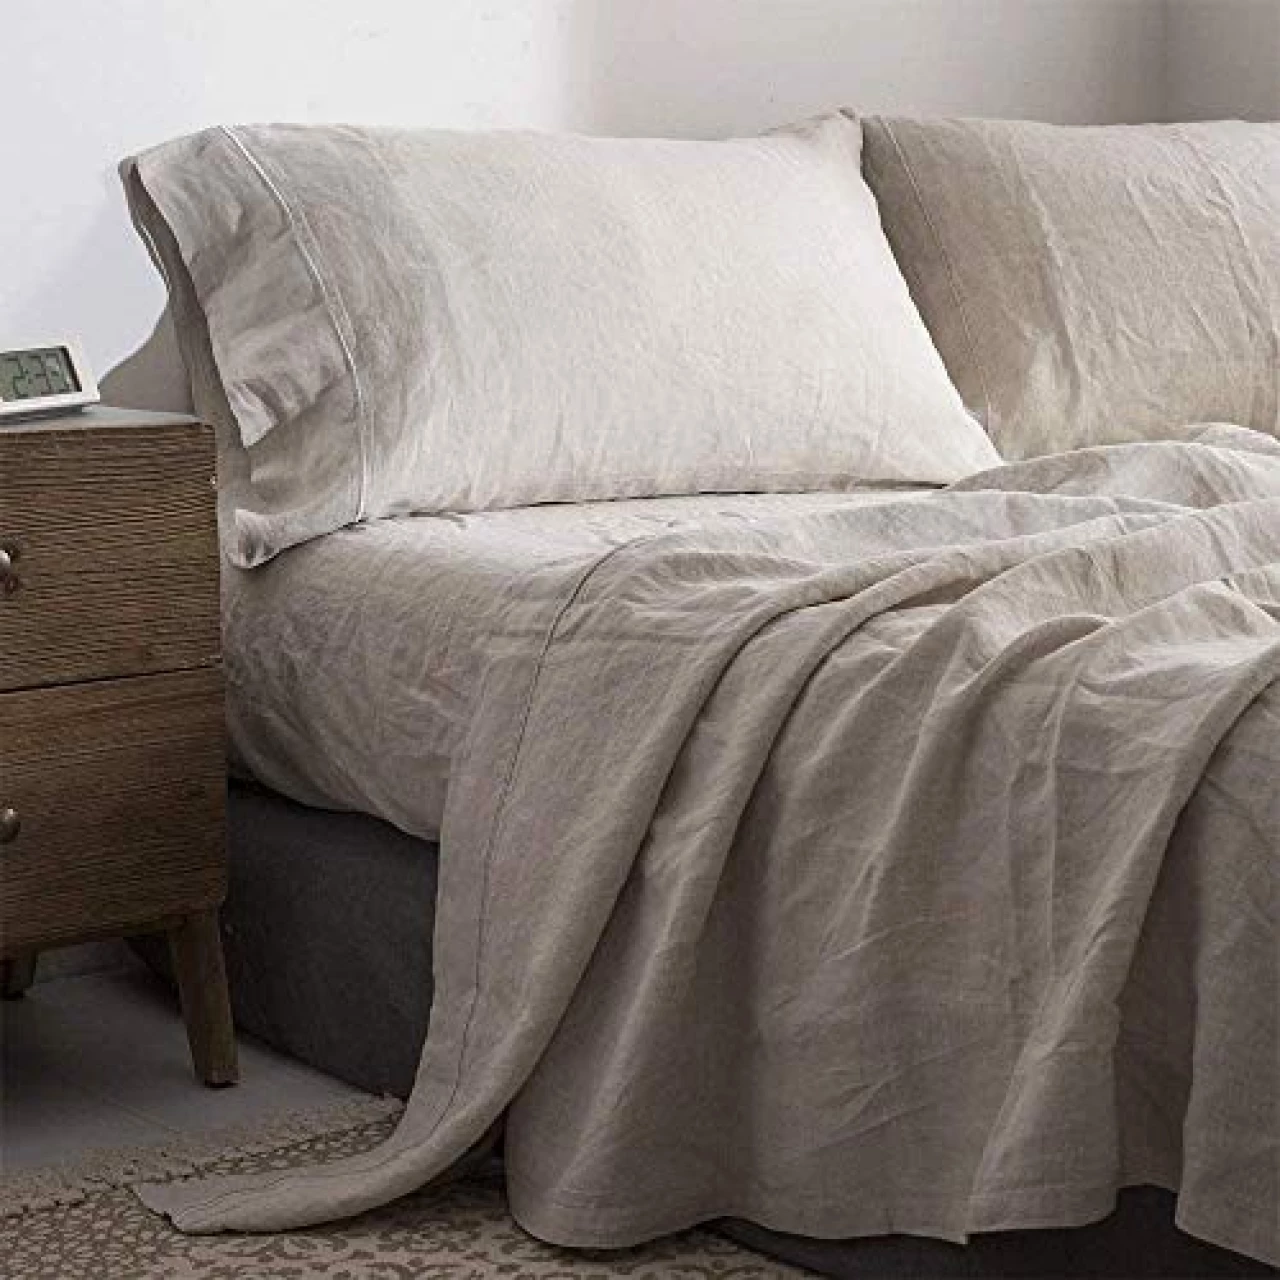 Simple&amp;Opulence 100% Washed Linen Sheet Set-King Size-Natural France Flax Bed Sheet-4 Pcs Breathable,Ultra Soft,Farmhouse Bedding (1 Flat Sheet,1 Fitted Sheet,2 Pillowcases)-Embroidery Linen